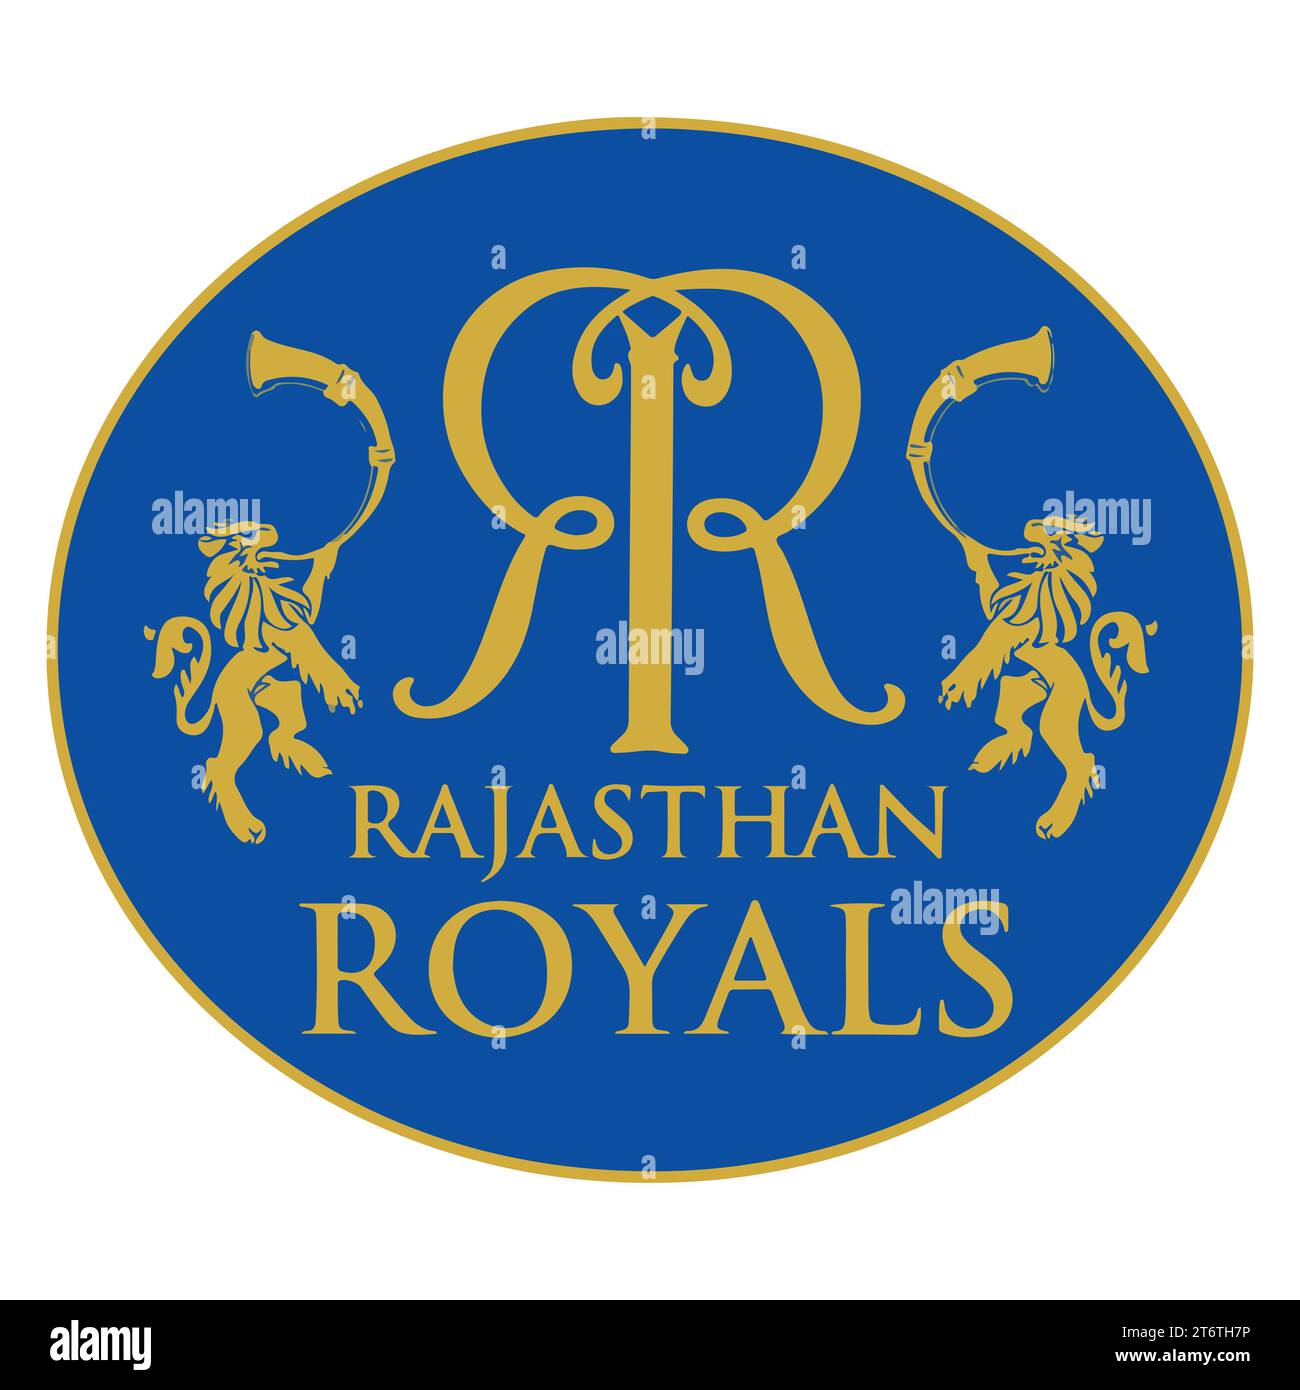 Rajasthan Royals Logo Indian Professional Cricket club, Vector Illustration Abstract Editable image Illustrazione Vettoriale